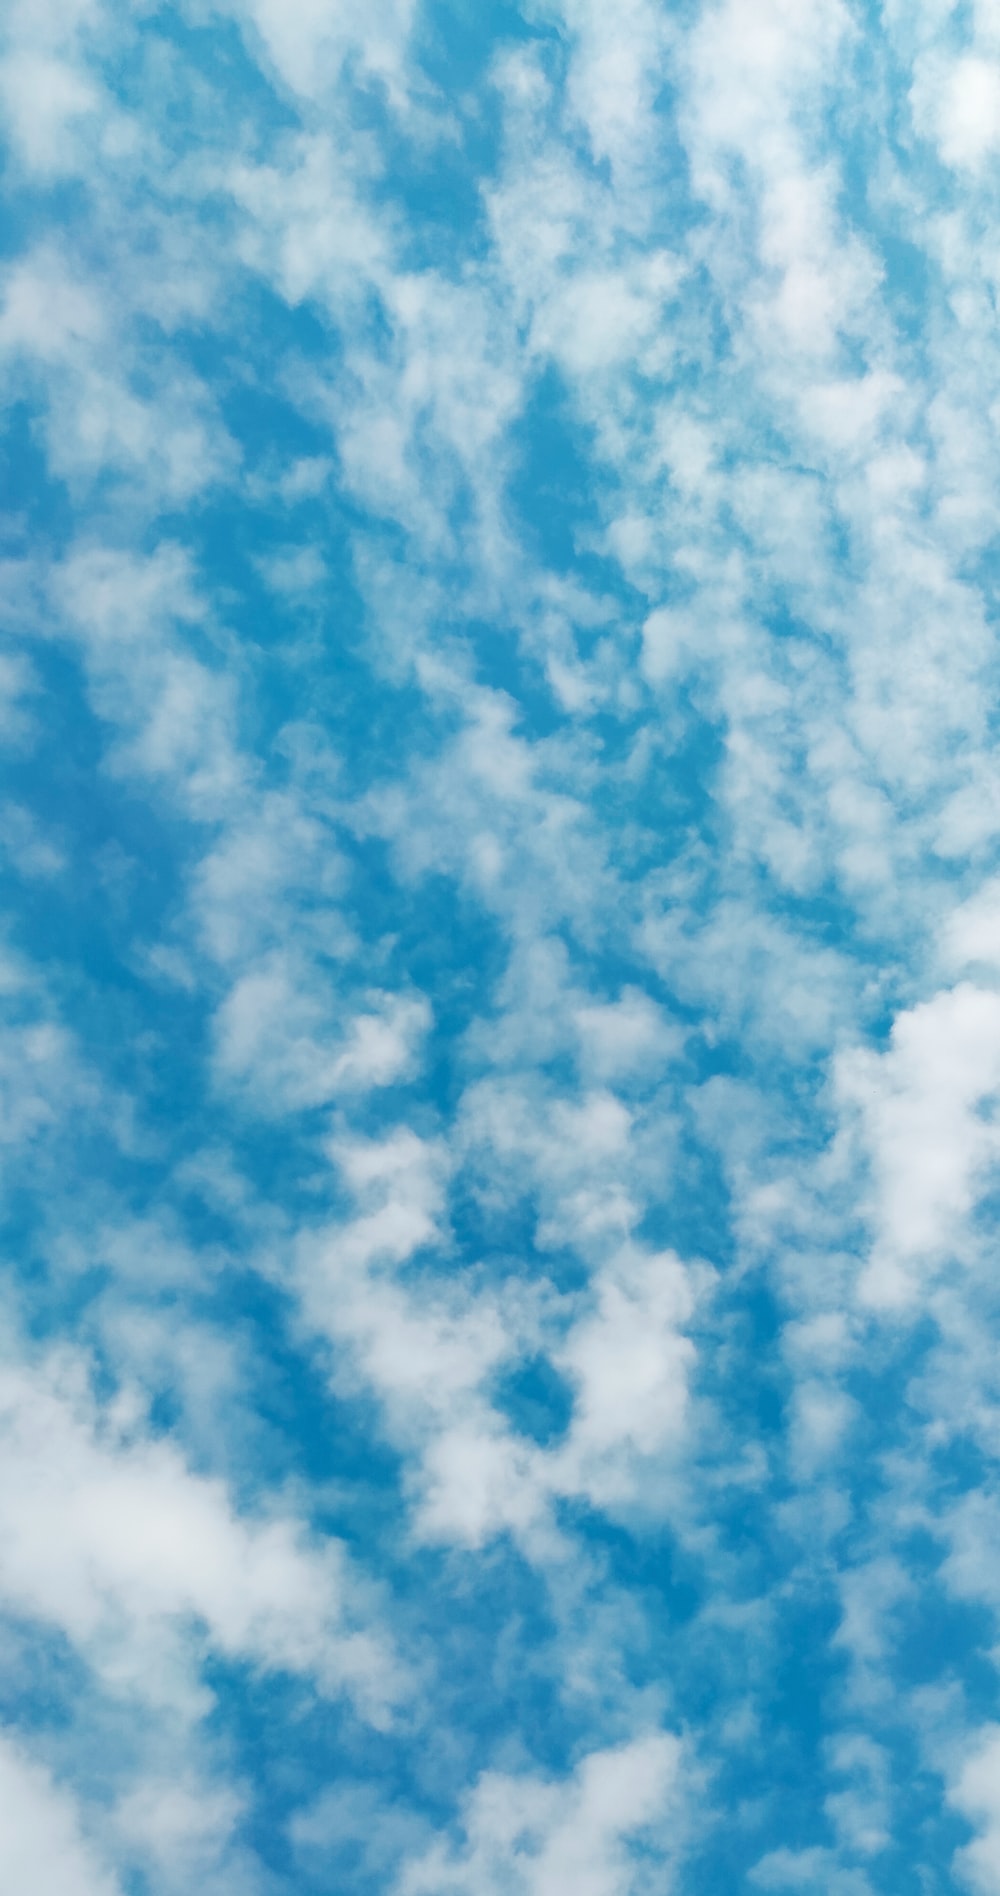 Stunning cloudy sky pictures download free images on